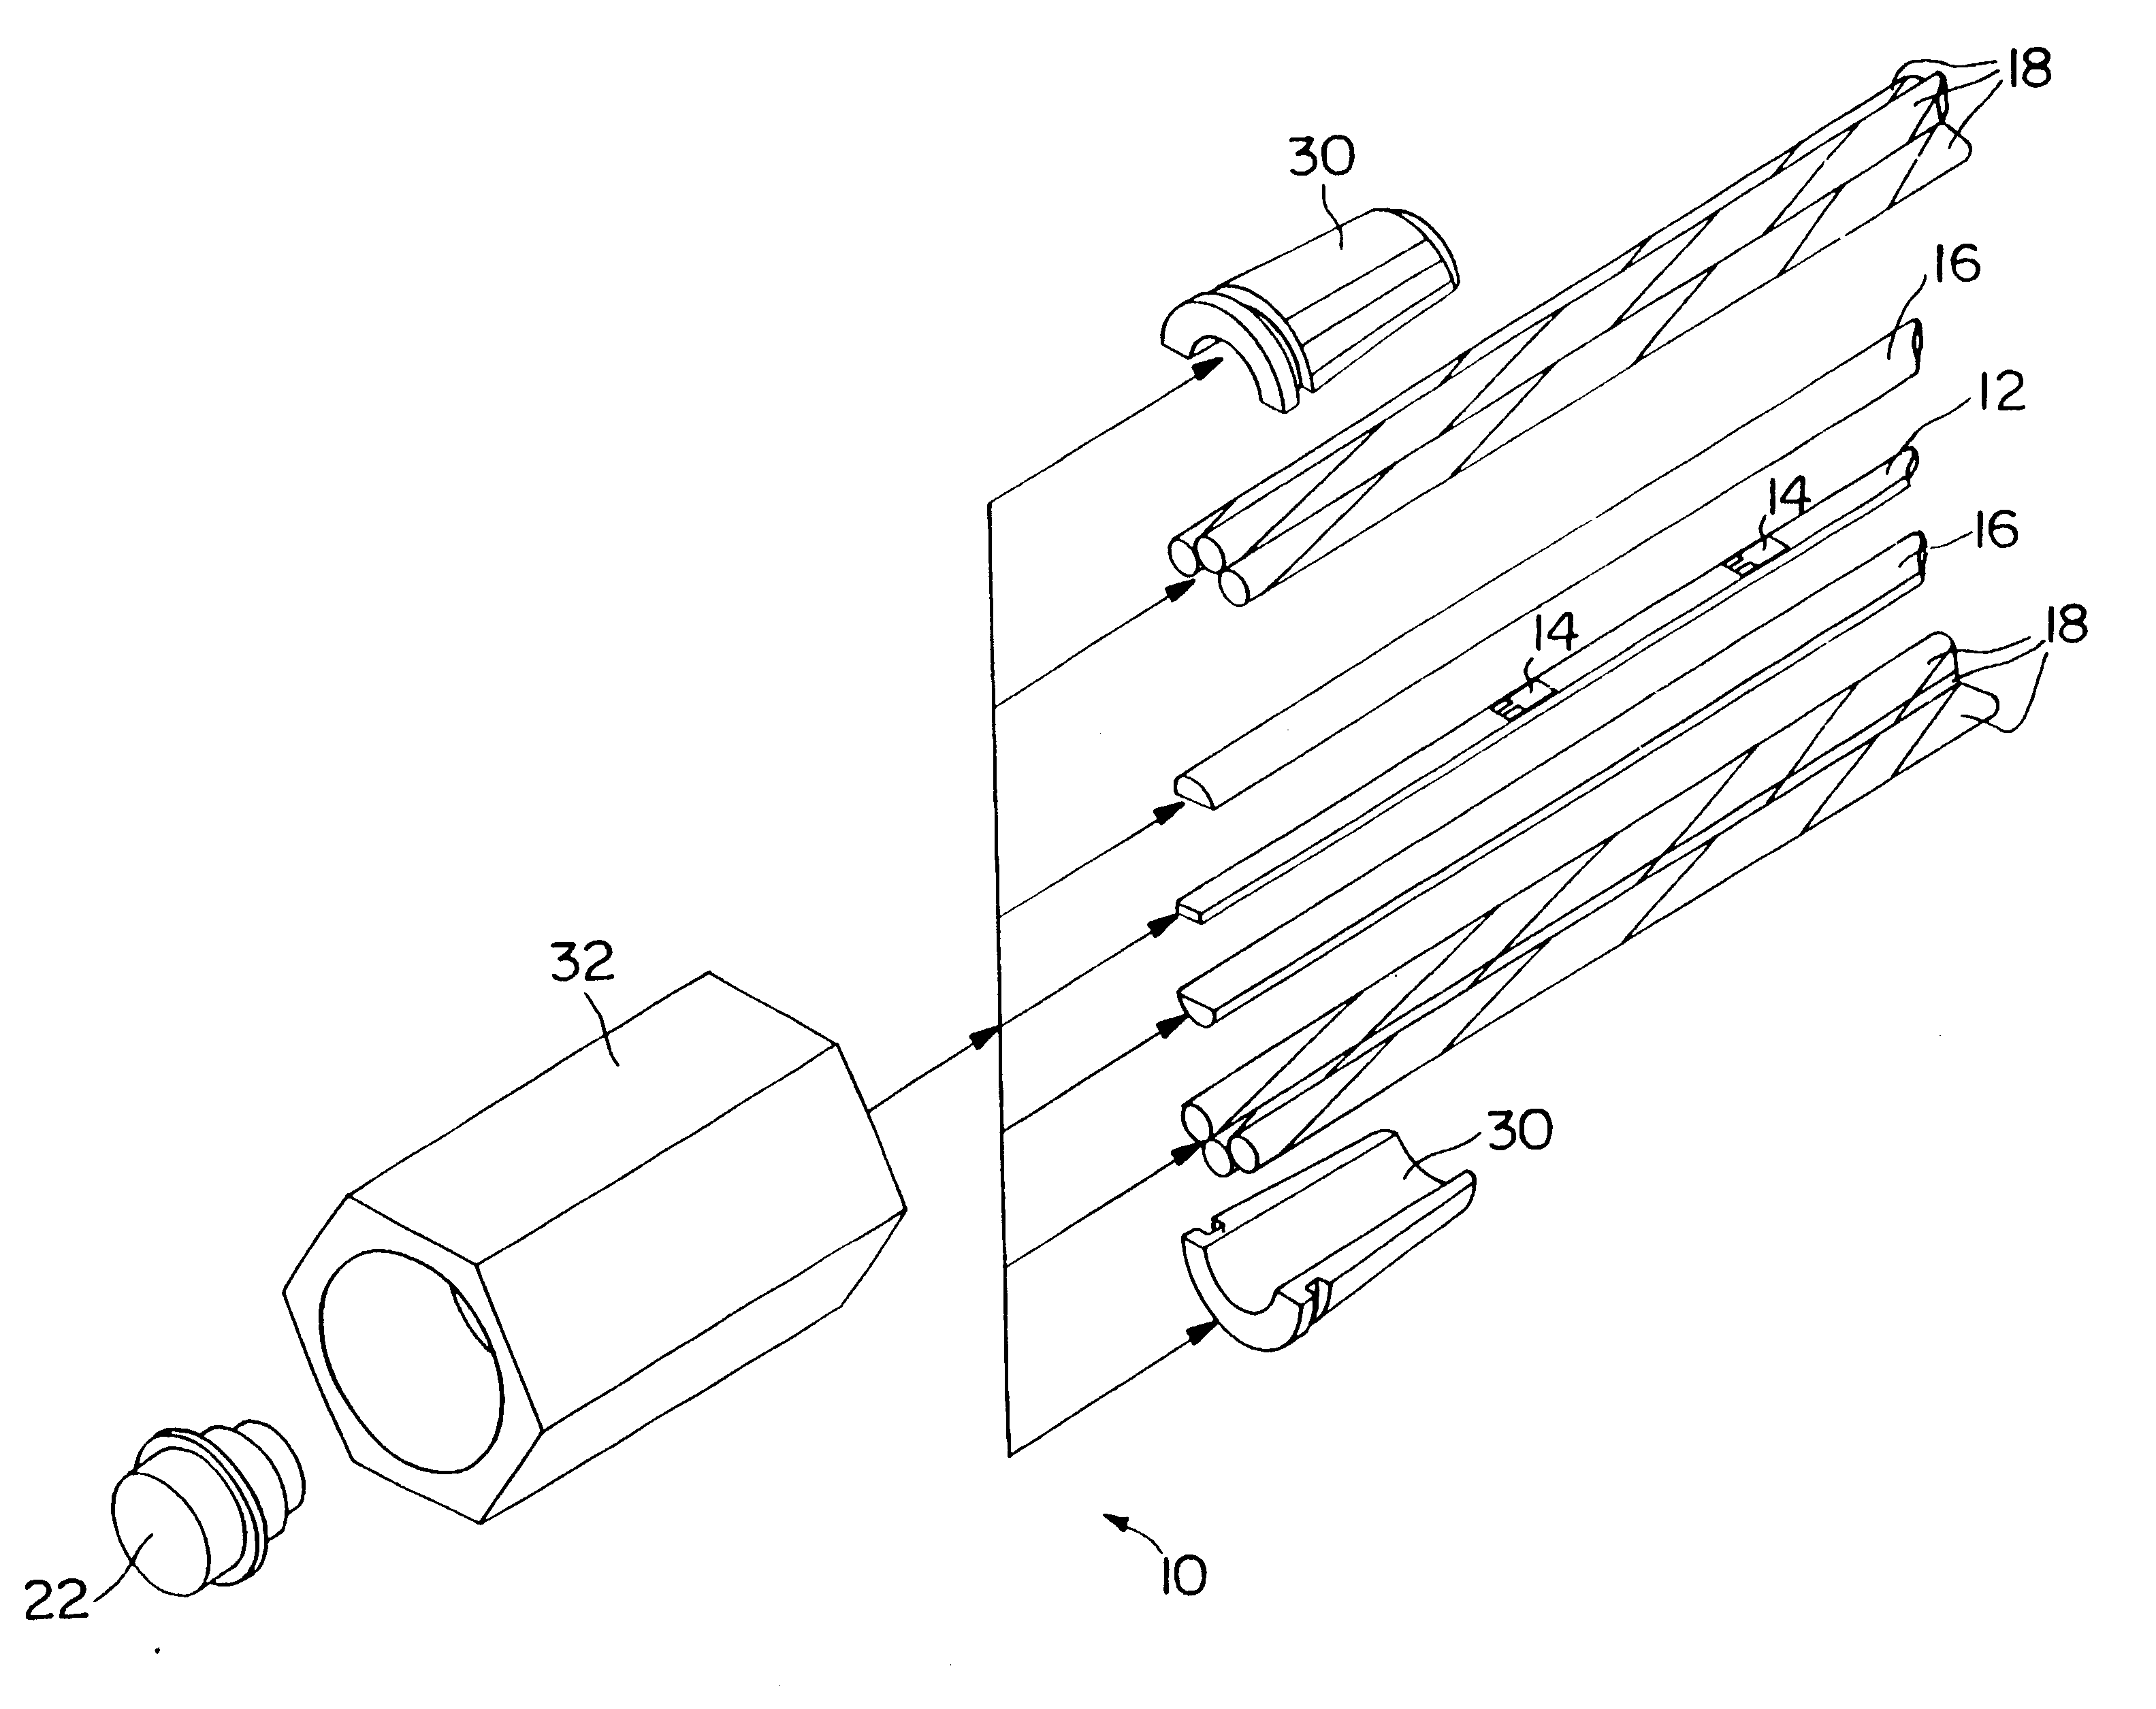 Support apparatus with stress measuring capability